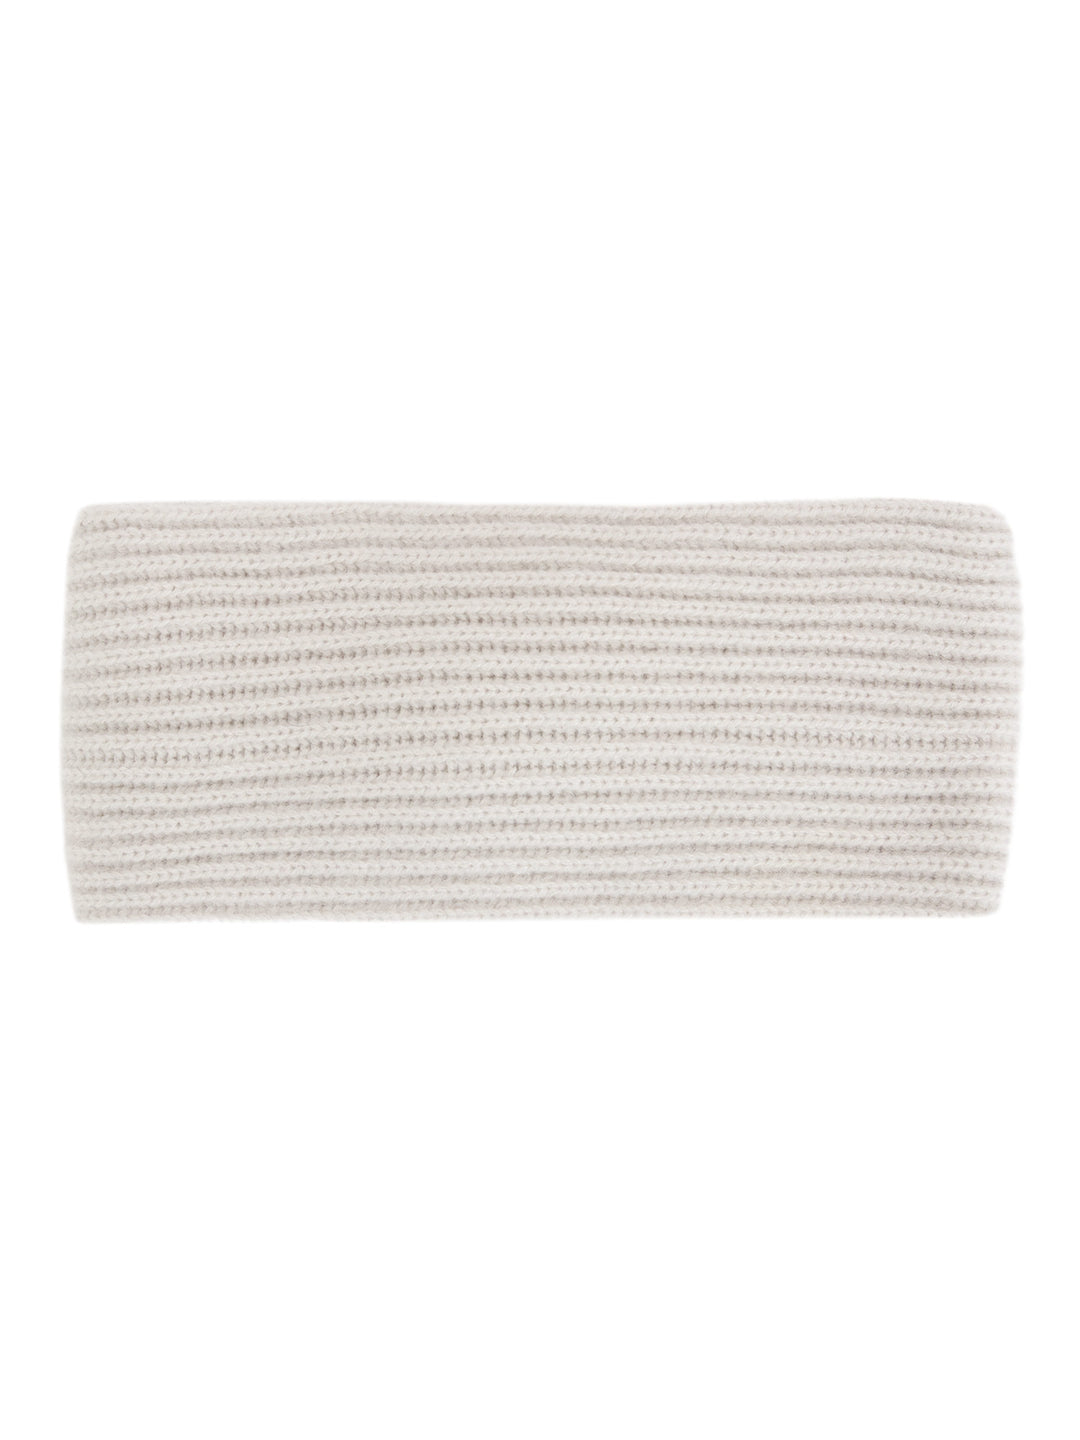 Cashmere head band Freya in 100% cashmere. Color: Cold Creme. Scandinavian design from Kashmina.